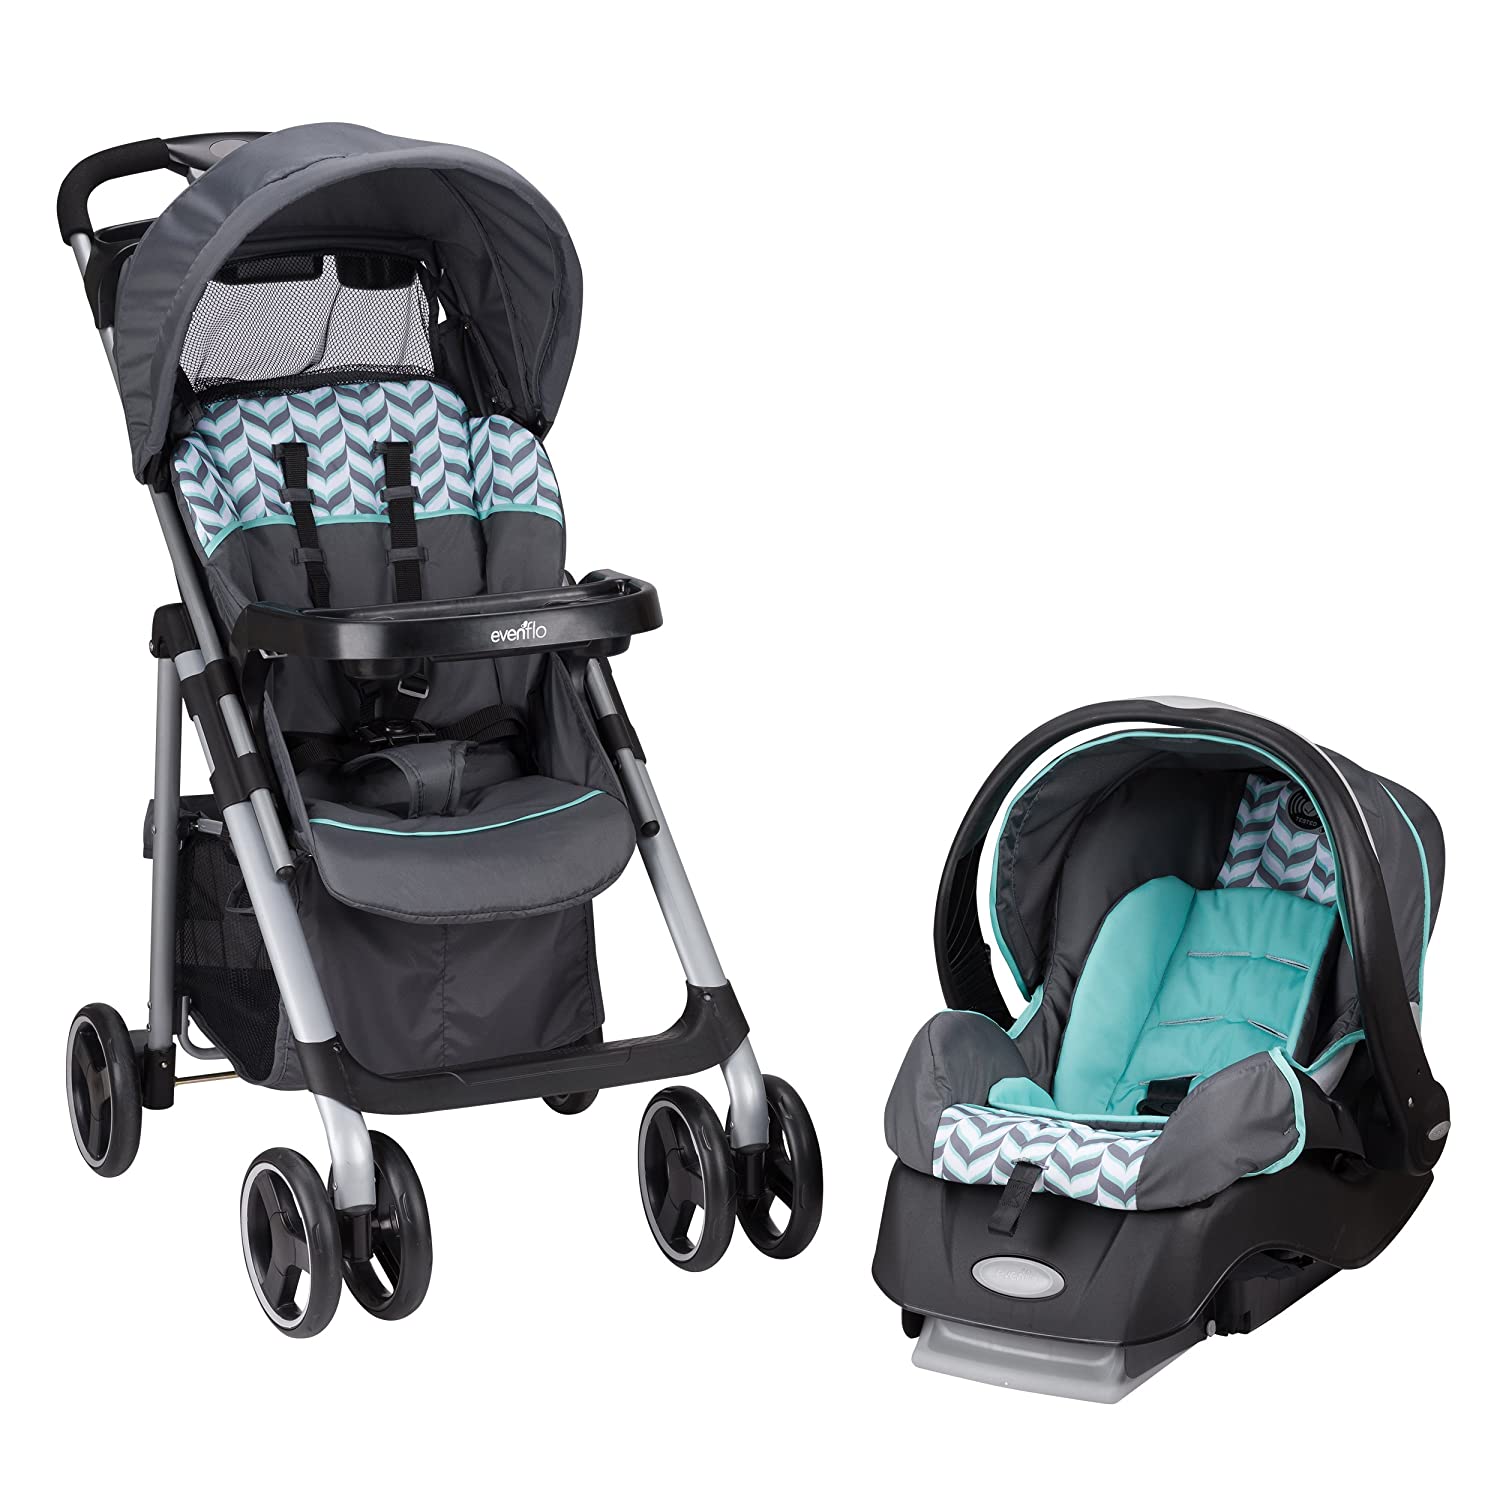 Top 5 Best Infant Travel Systems Reviews in 2023 2